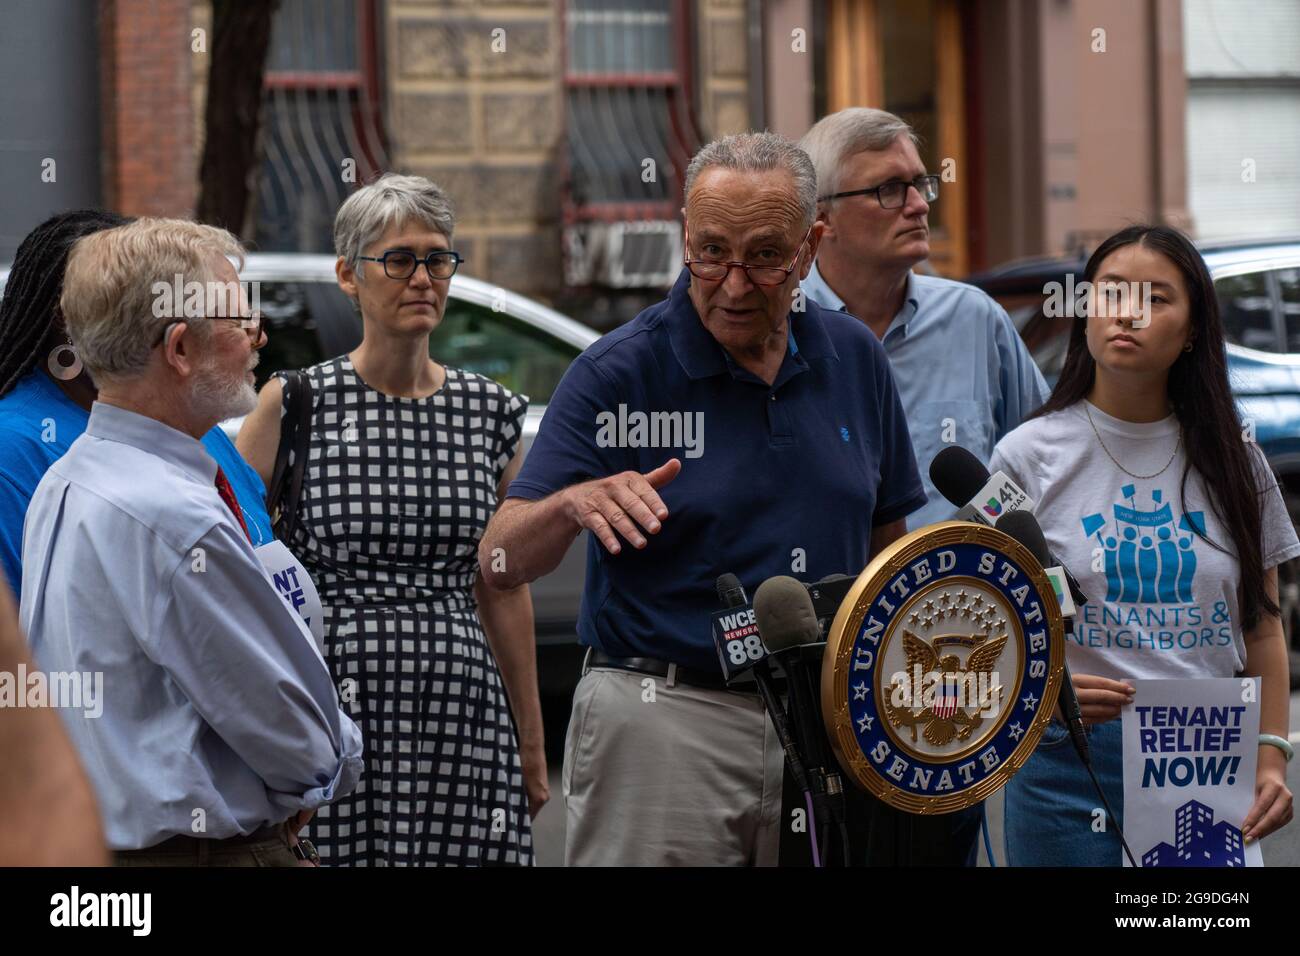 NEW YORK, NY – JULY 25: Senate Majority Leader Senator Chuck Schumer (D-NY) speaks at a press conference at Hells Kitchen on July 25, 2021 in New York City.  Standing alongside NY State Senator Brian Kavanagh, Assembly Member Richard Gottfried and community rent activists Sen. Chuck Schumer says that the Cuomo administration is failing to disburse the $2.4 billion in rent relief meant for New York that could be lost at the end of September if state doesn't release the money to needy tenants who were hit hard during covid-19 pandemic. Credit: Ron Adar/Alamy Live News Stock Photo